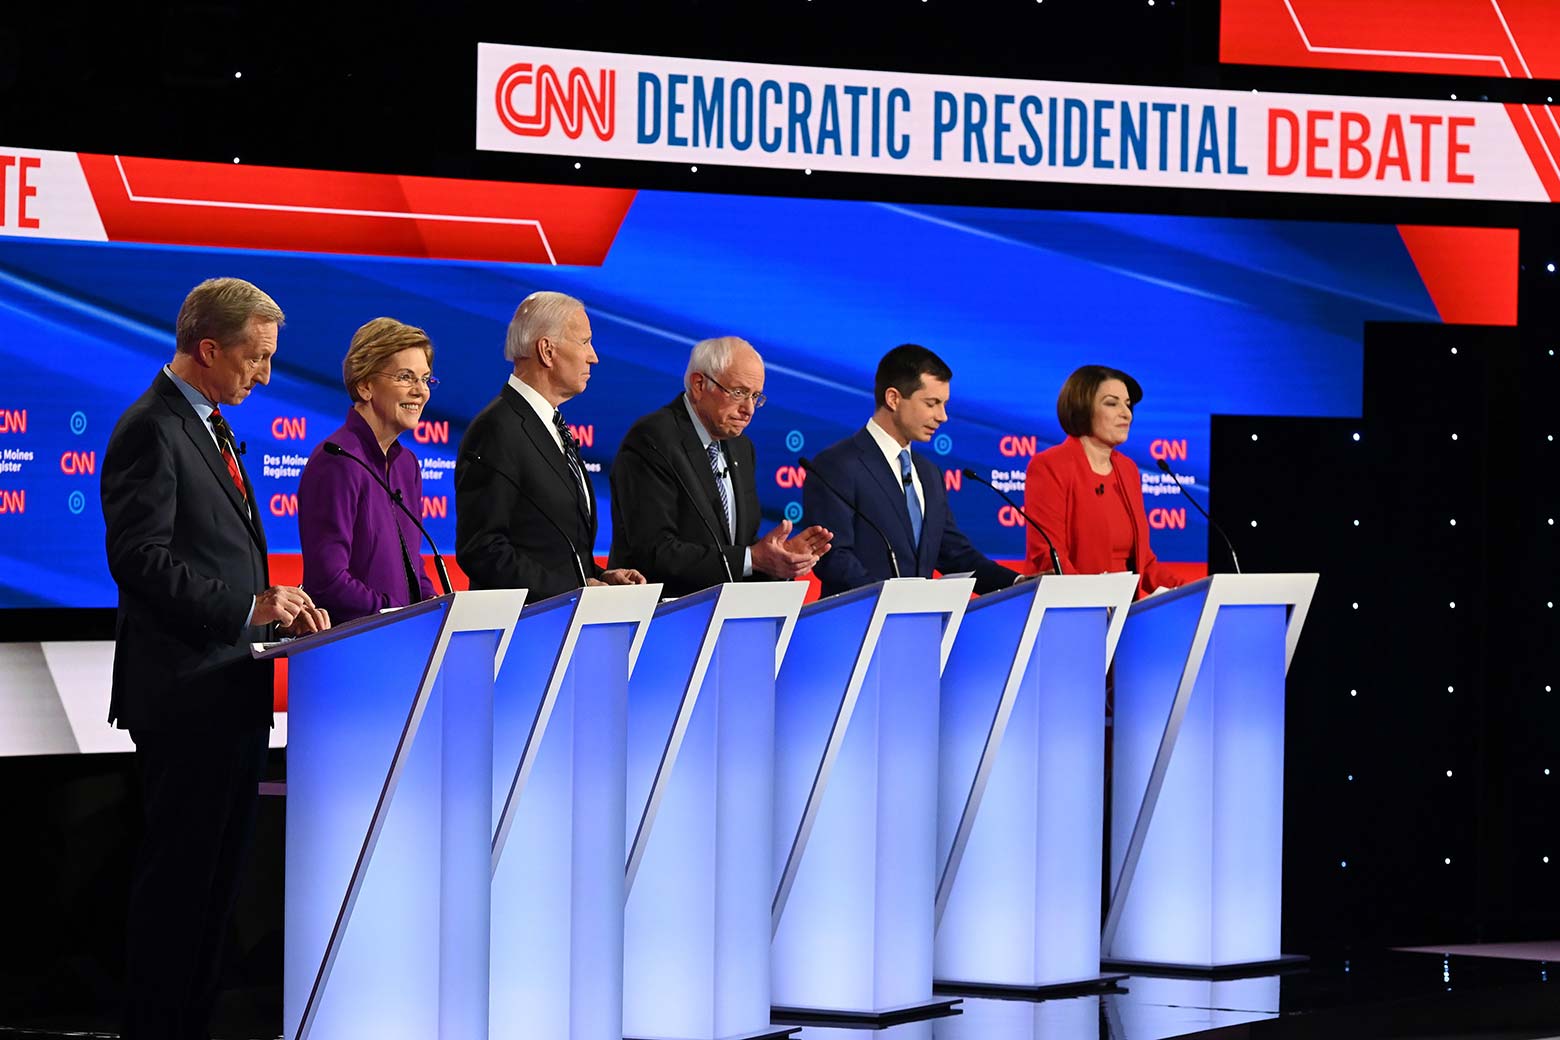 The candidates as seen from the left side of the debate stage